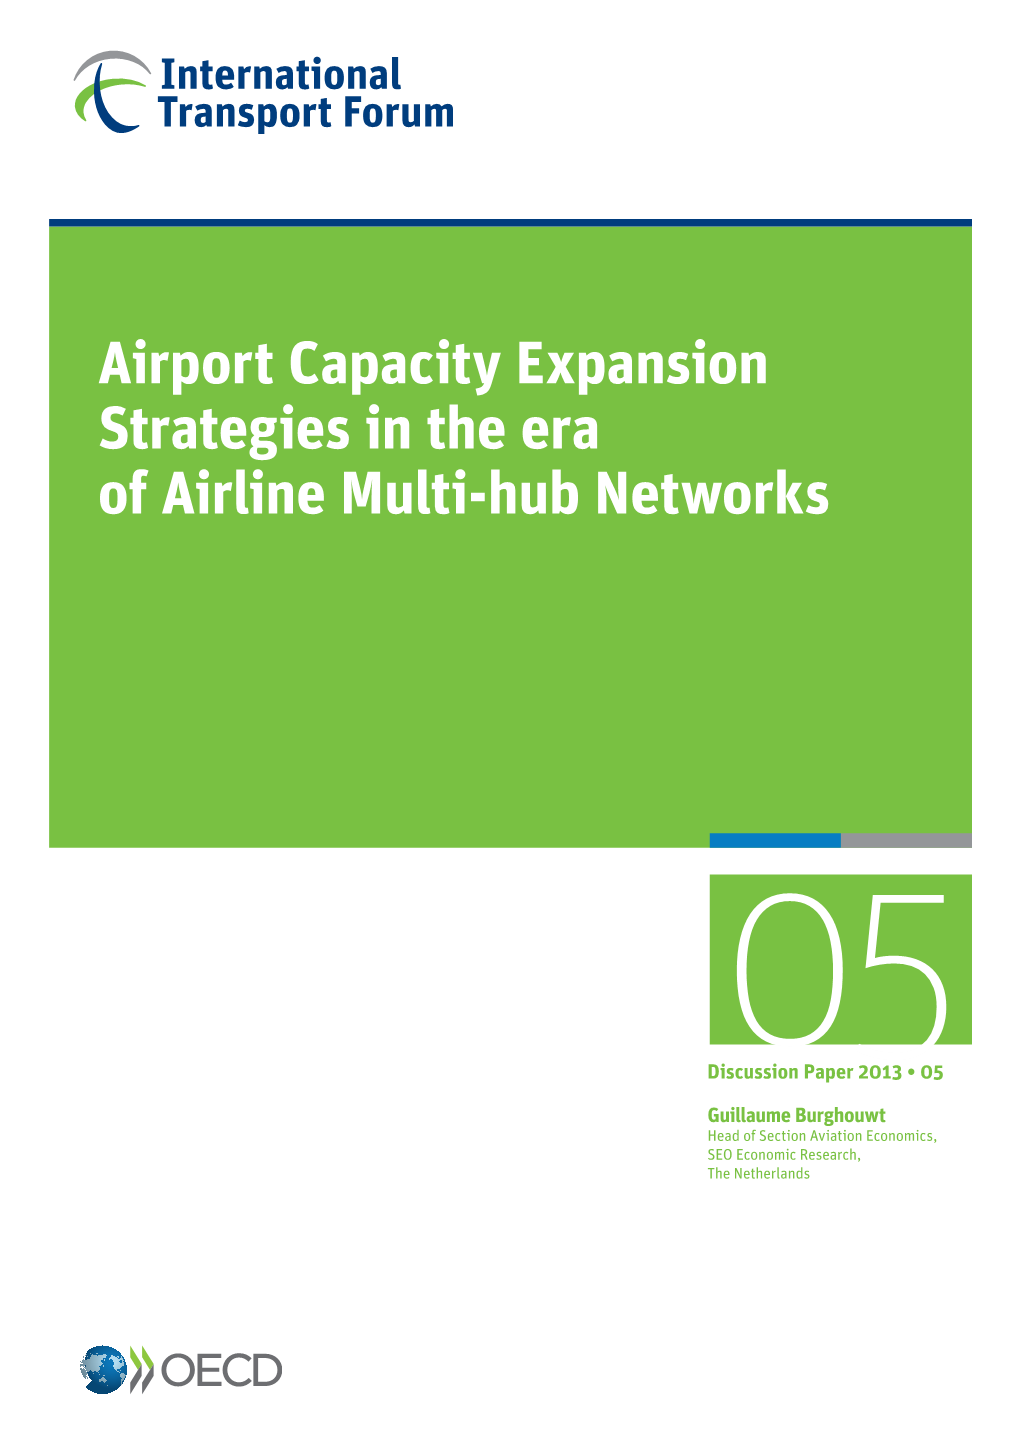 Airport Capacity Expansion Strategies in the Era of Airline Multi-Hub Networks